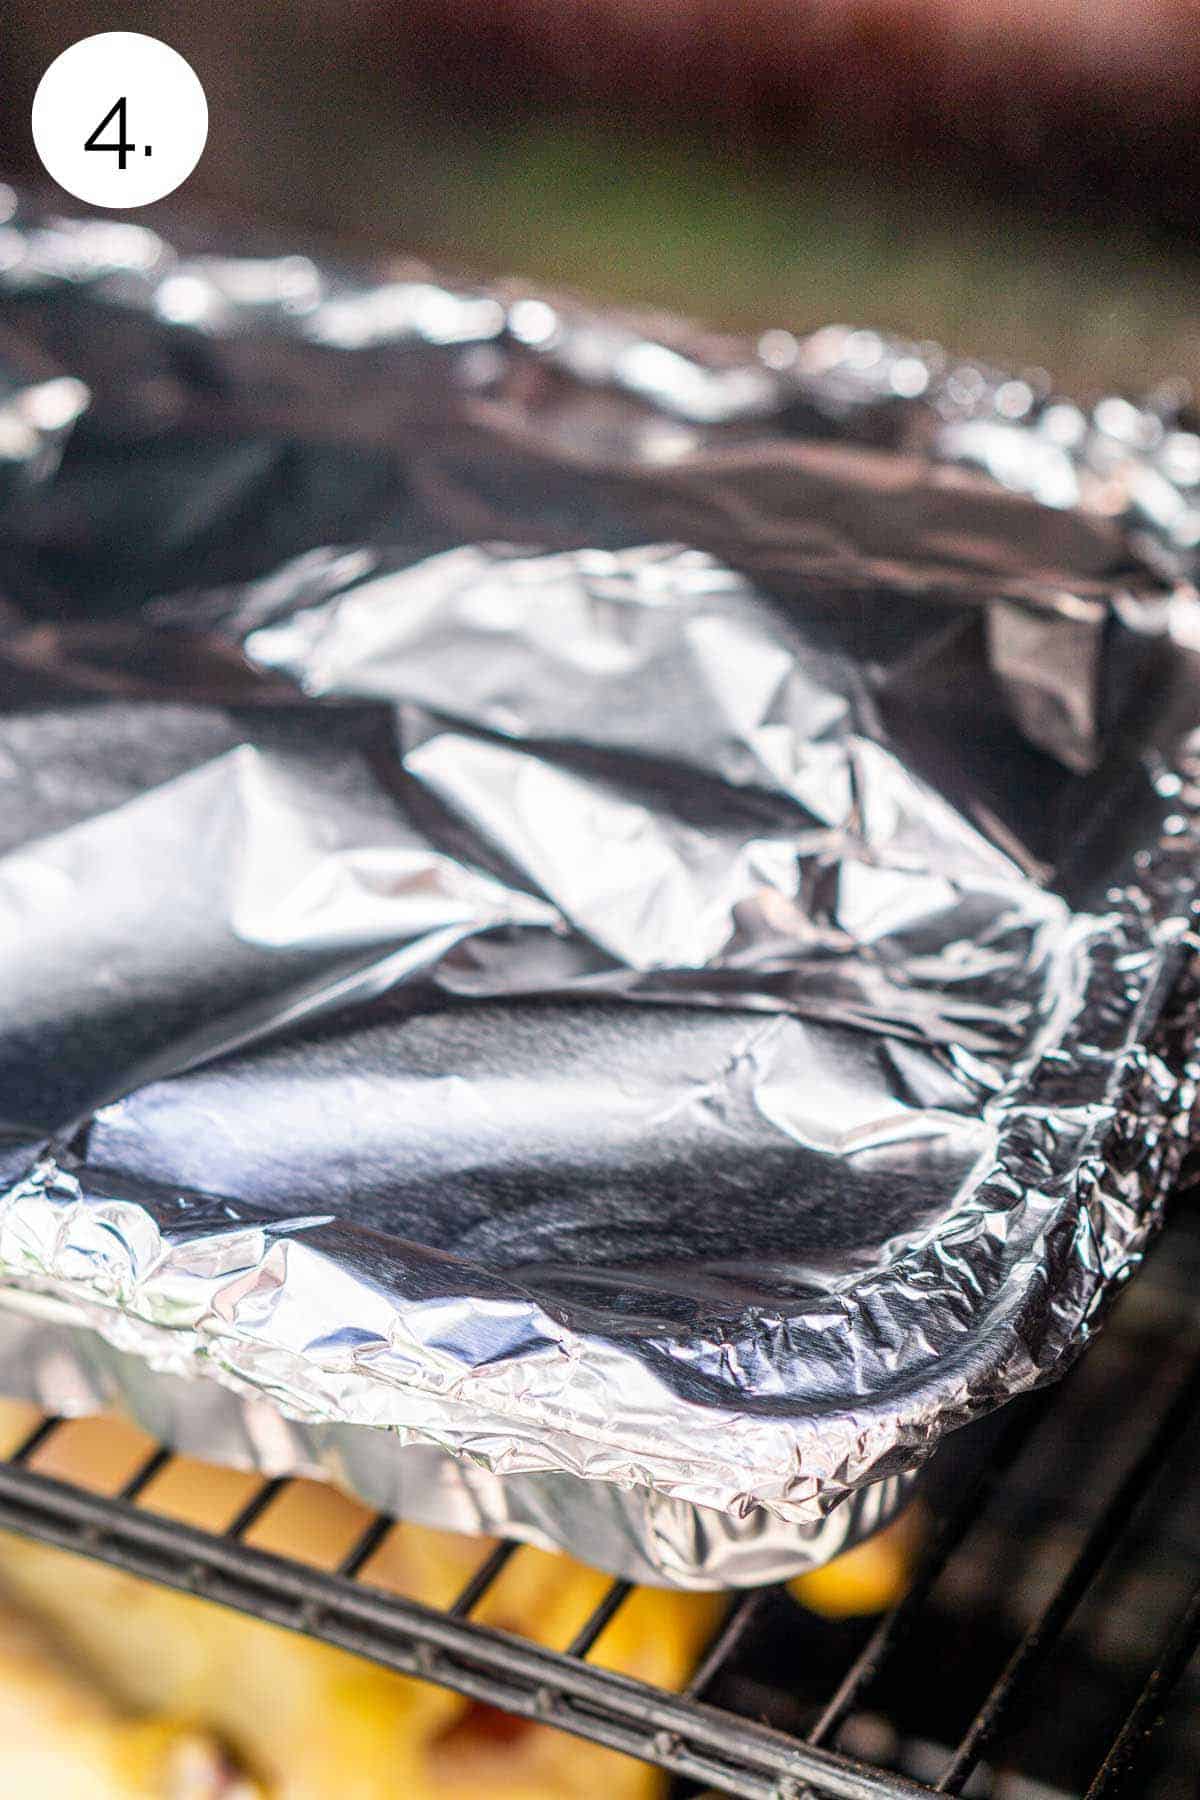 The aluminum foil-covered pan back in the smoker to finish the second half of the cooking process.